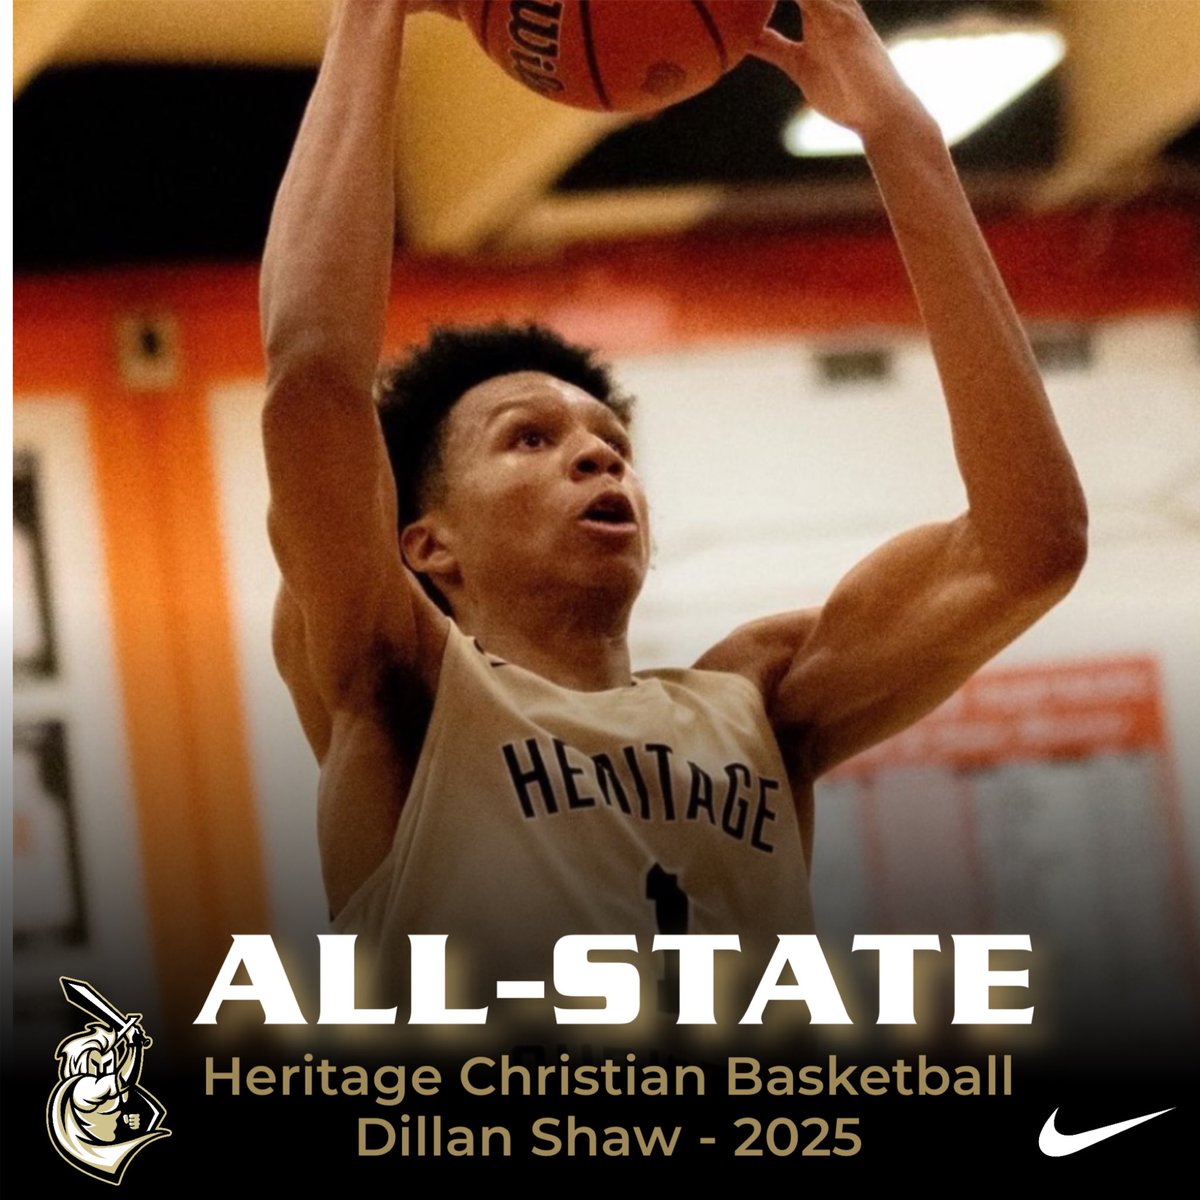 Congratulations to @Dillan_Shaw_1 on being named @CalHiSports ALL-STATE #itsgreattobeaheritagewarrior